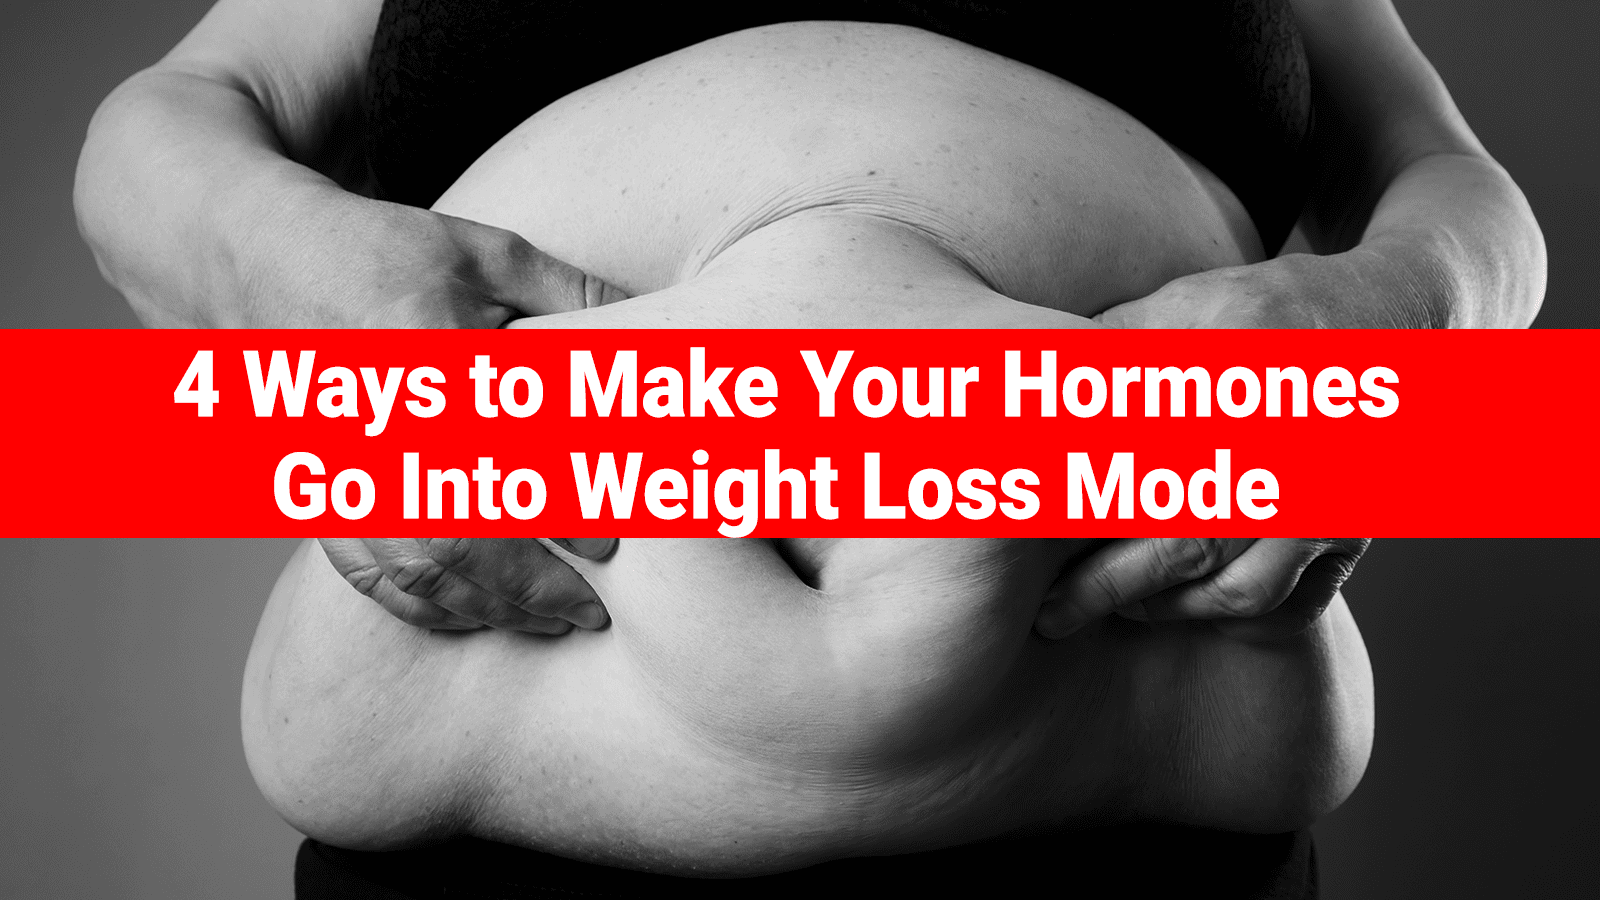 4 Ways to Make Your Hormones Go Into Weight Loss Mode